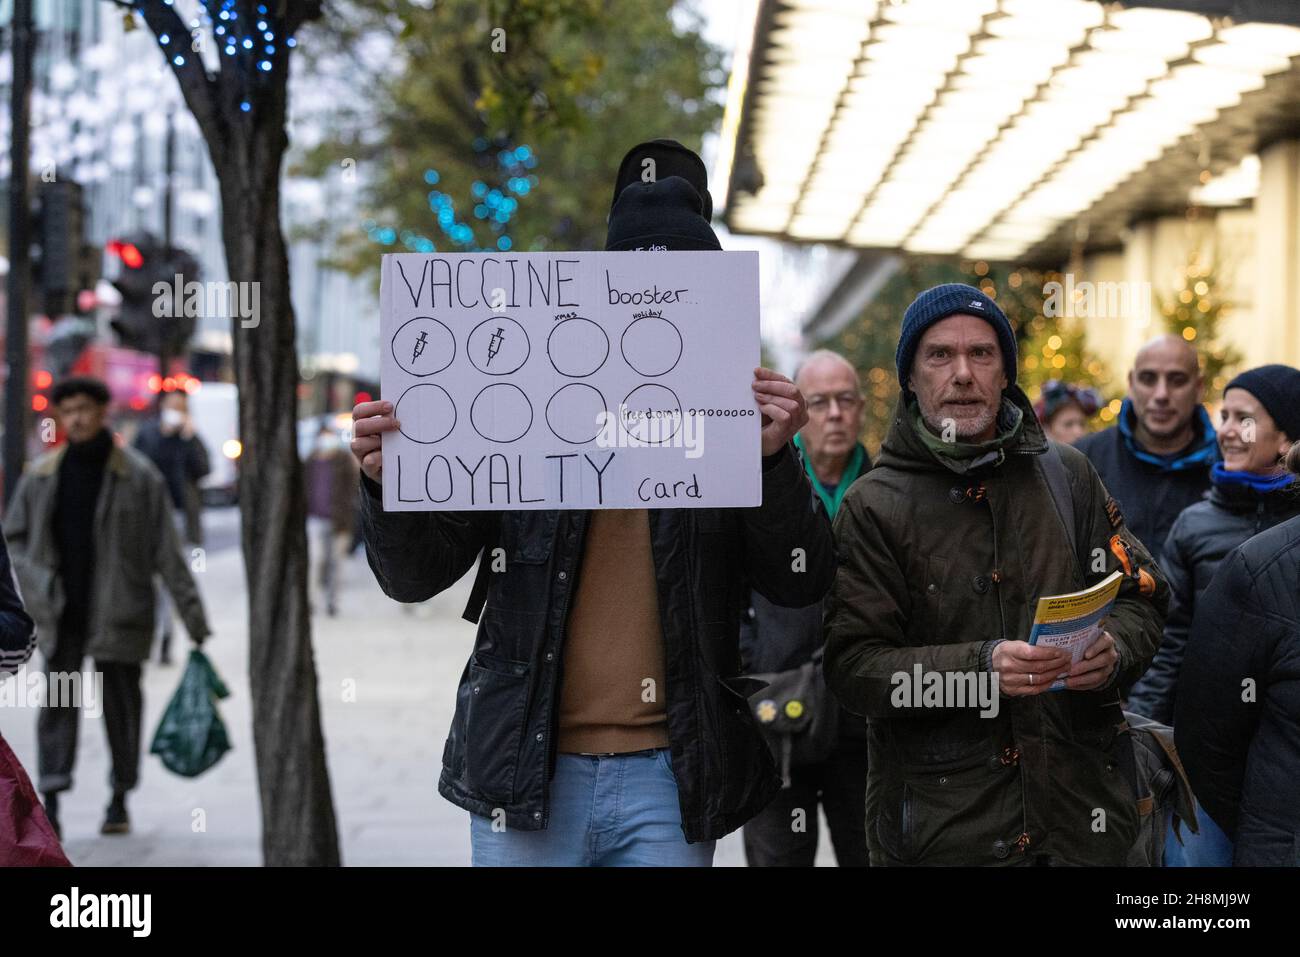 Coronavirus Vaccine campaigner holding a placard along Oxford Street during the build up to Christmas 2021 and the increasing COVID 19 cases in the UK. Stock Photo